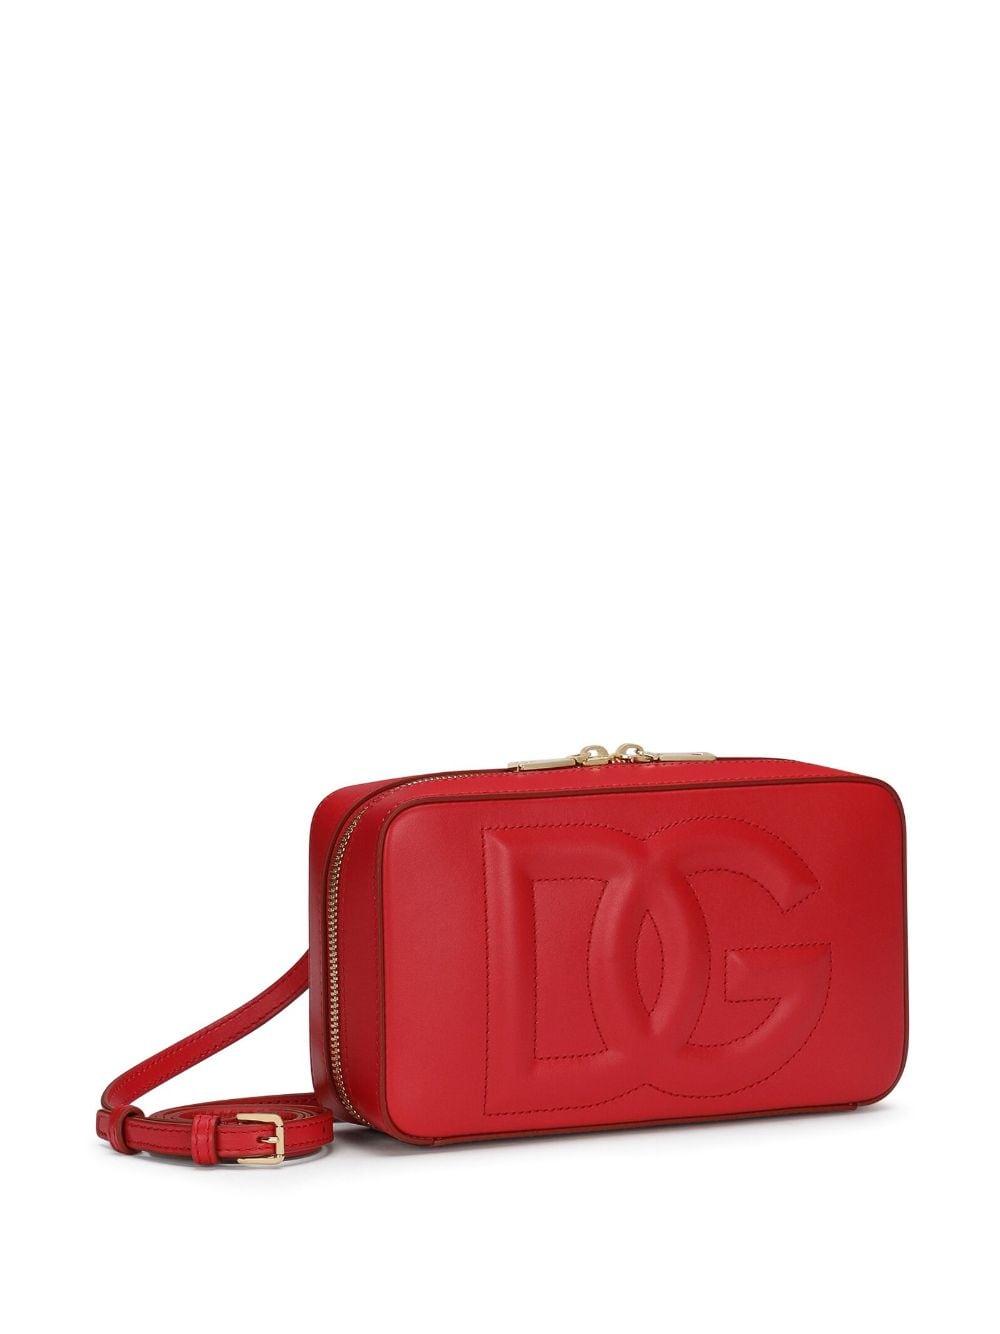 chanel red tote bag leather